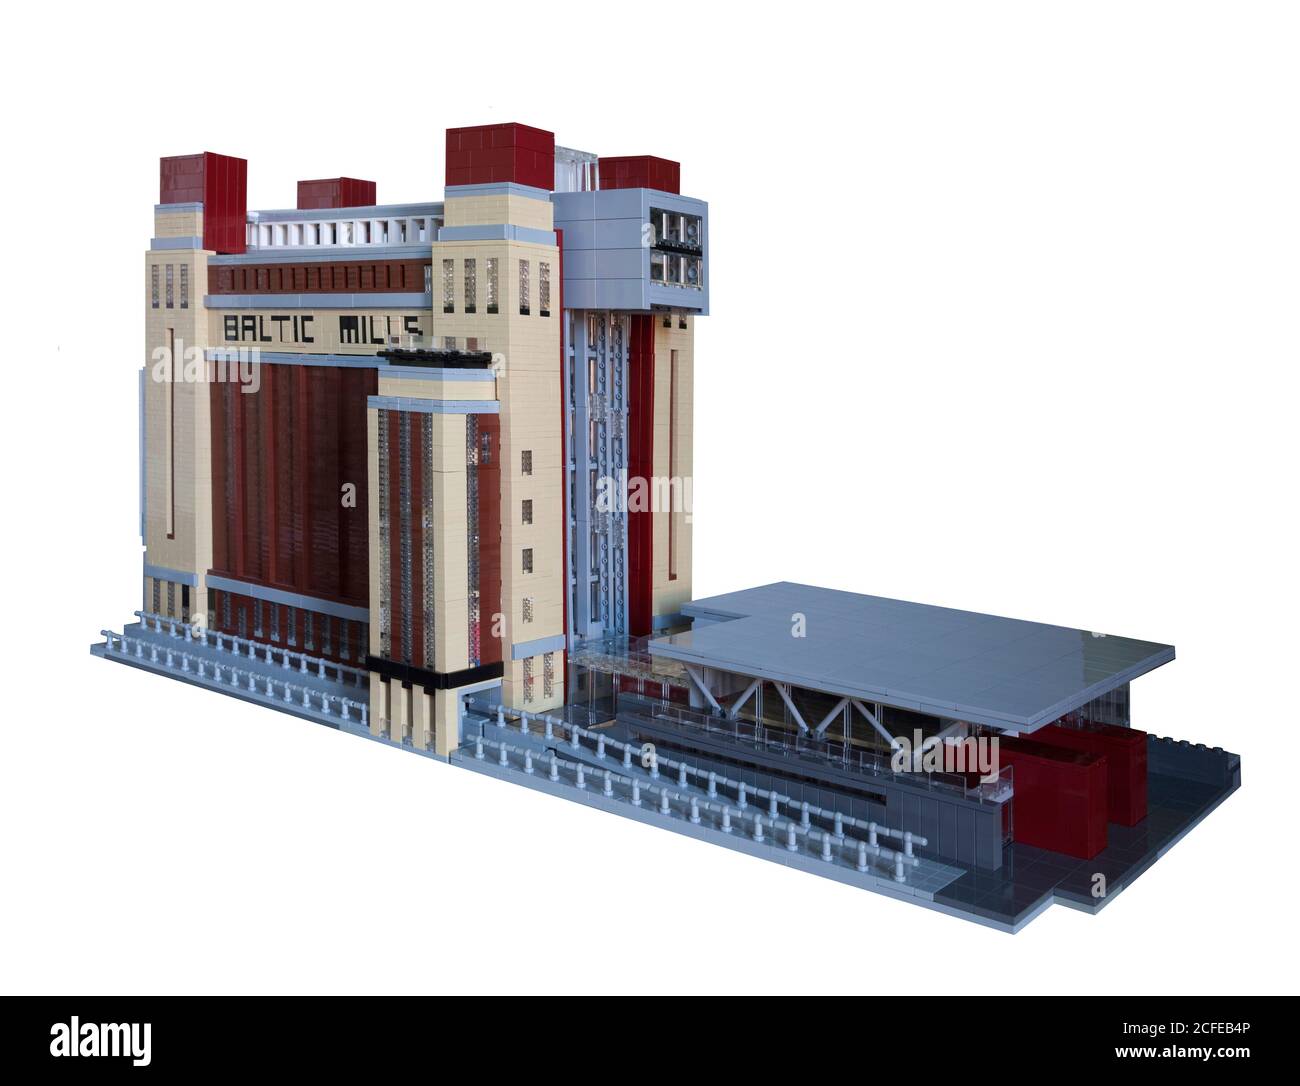 BALTIC Gallery built from LEGO Stock Photo